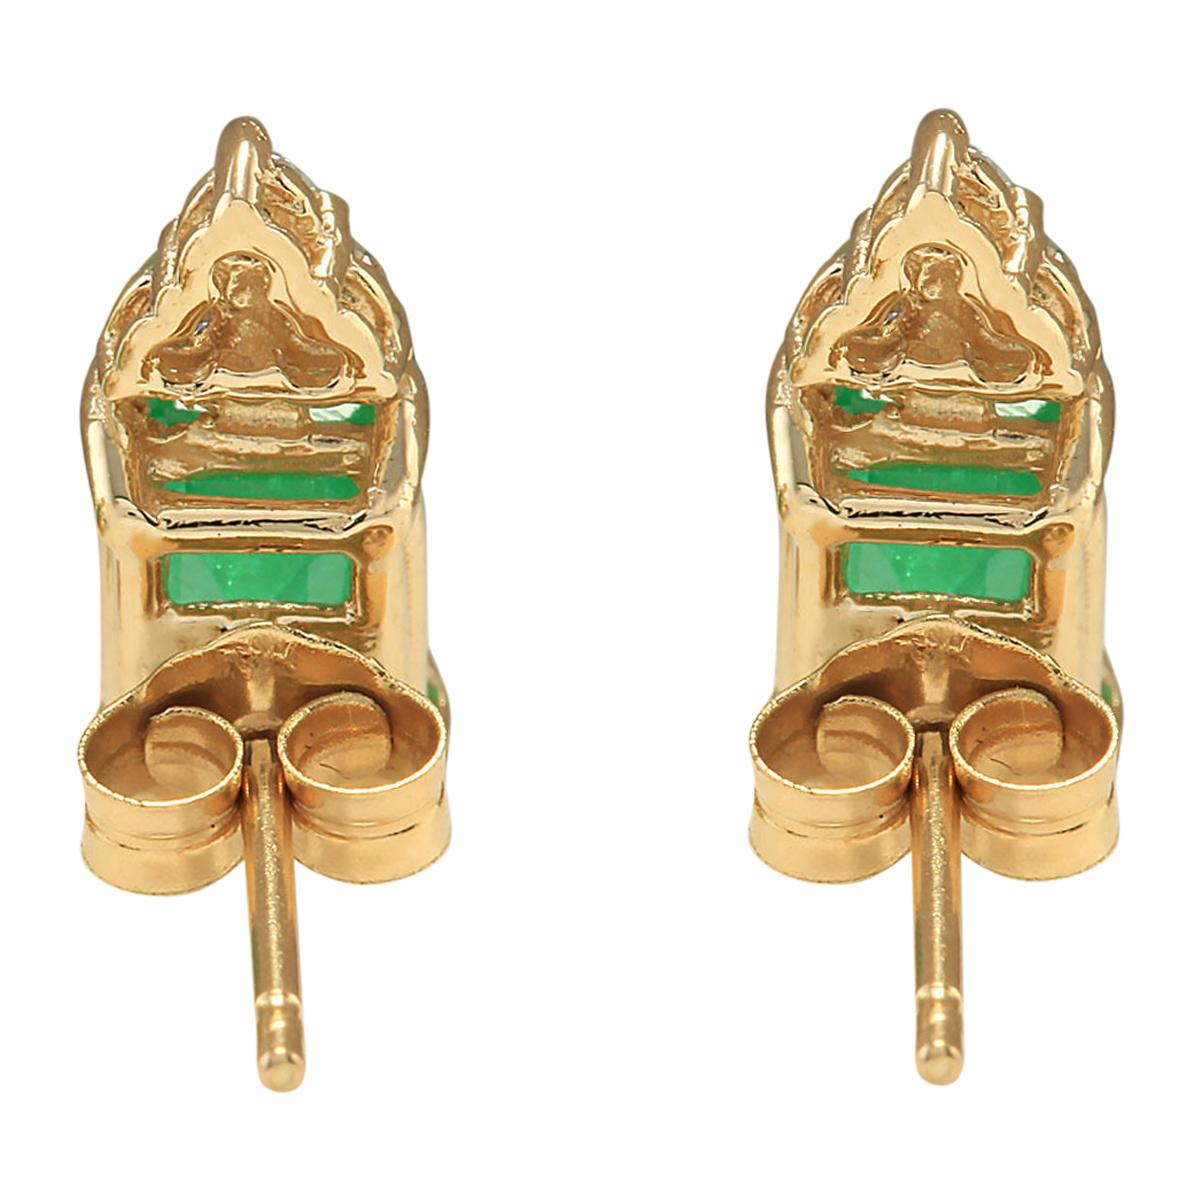 Stamped: 14K Yellow Gold
Total Earrings Weight: 1.2 Grams
Total Natural Emerald Weight is 1.45 Carat (Measures: 6.00x4.00 mm)
Color: Green
Total Natural Diamond Weight is 0.15 Carat
Color: F-G, Clarity: VS2-SI1
Face Measures: 11.80x4.15 mm
Sku: